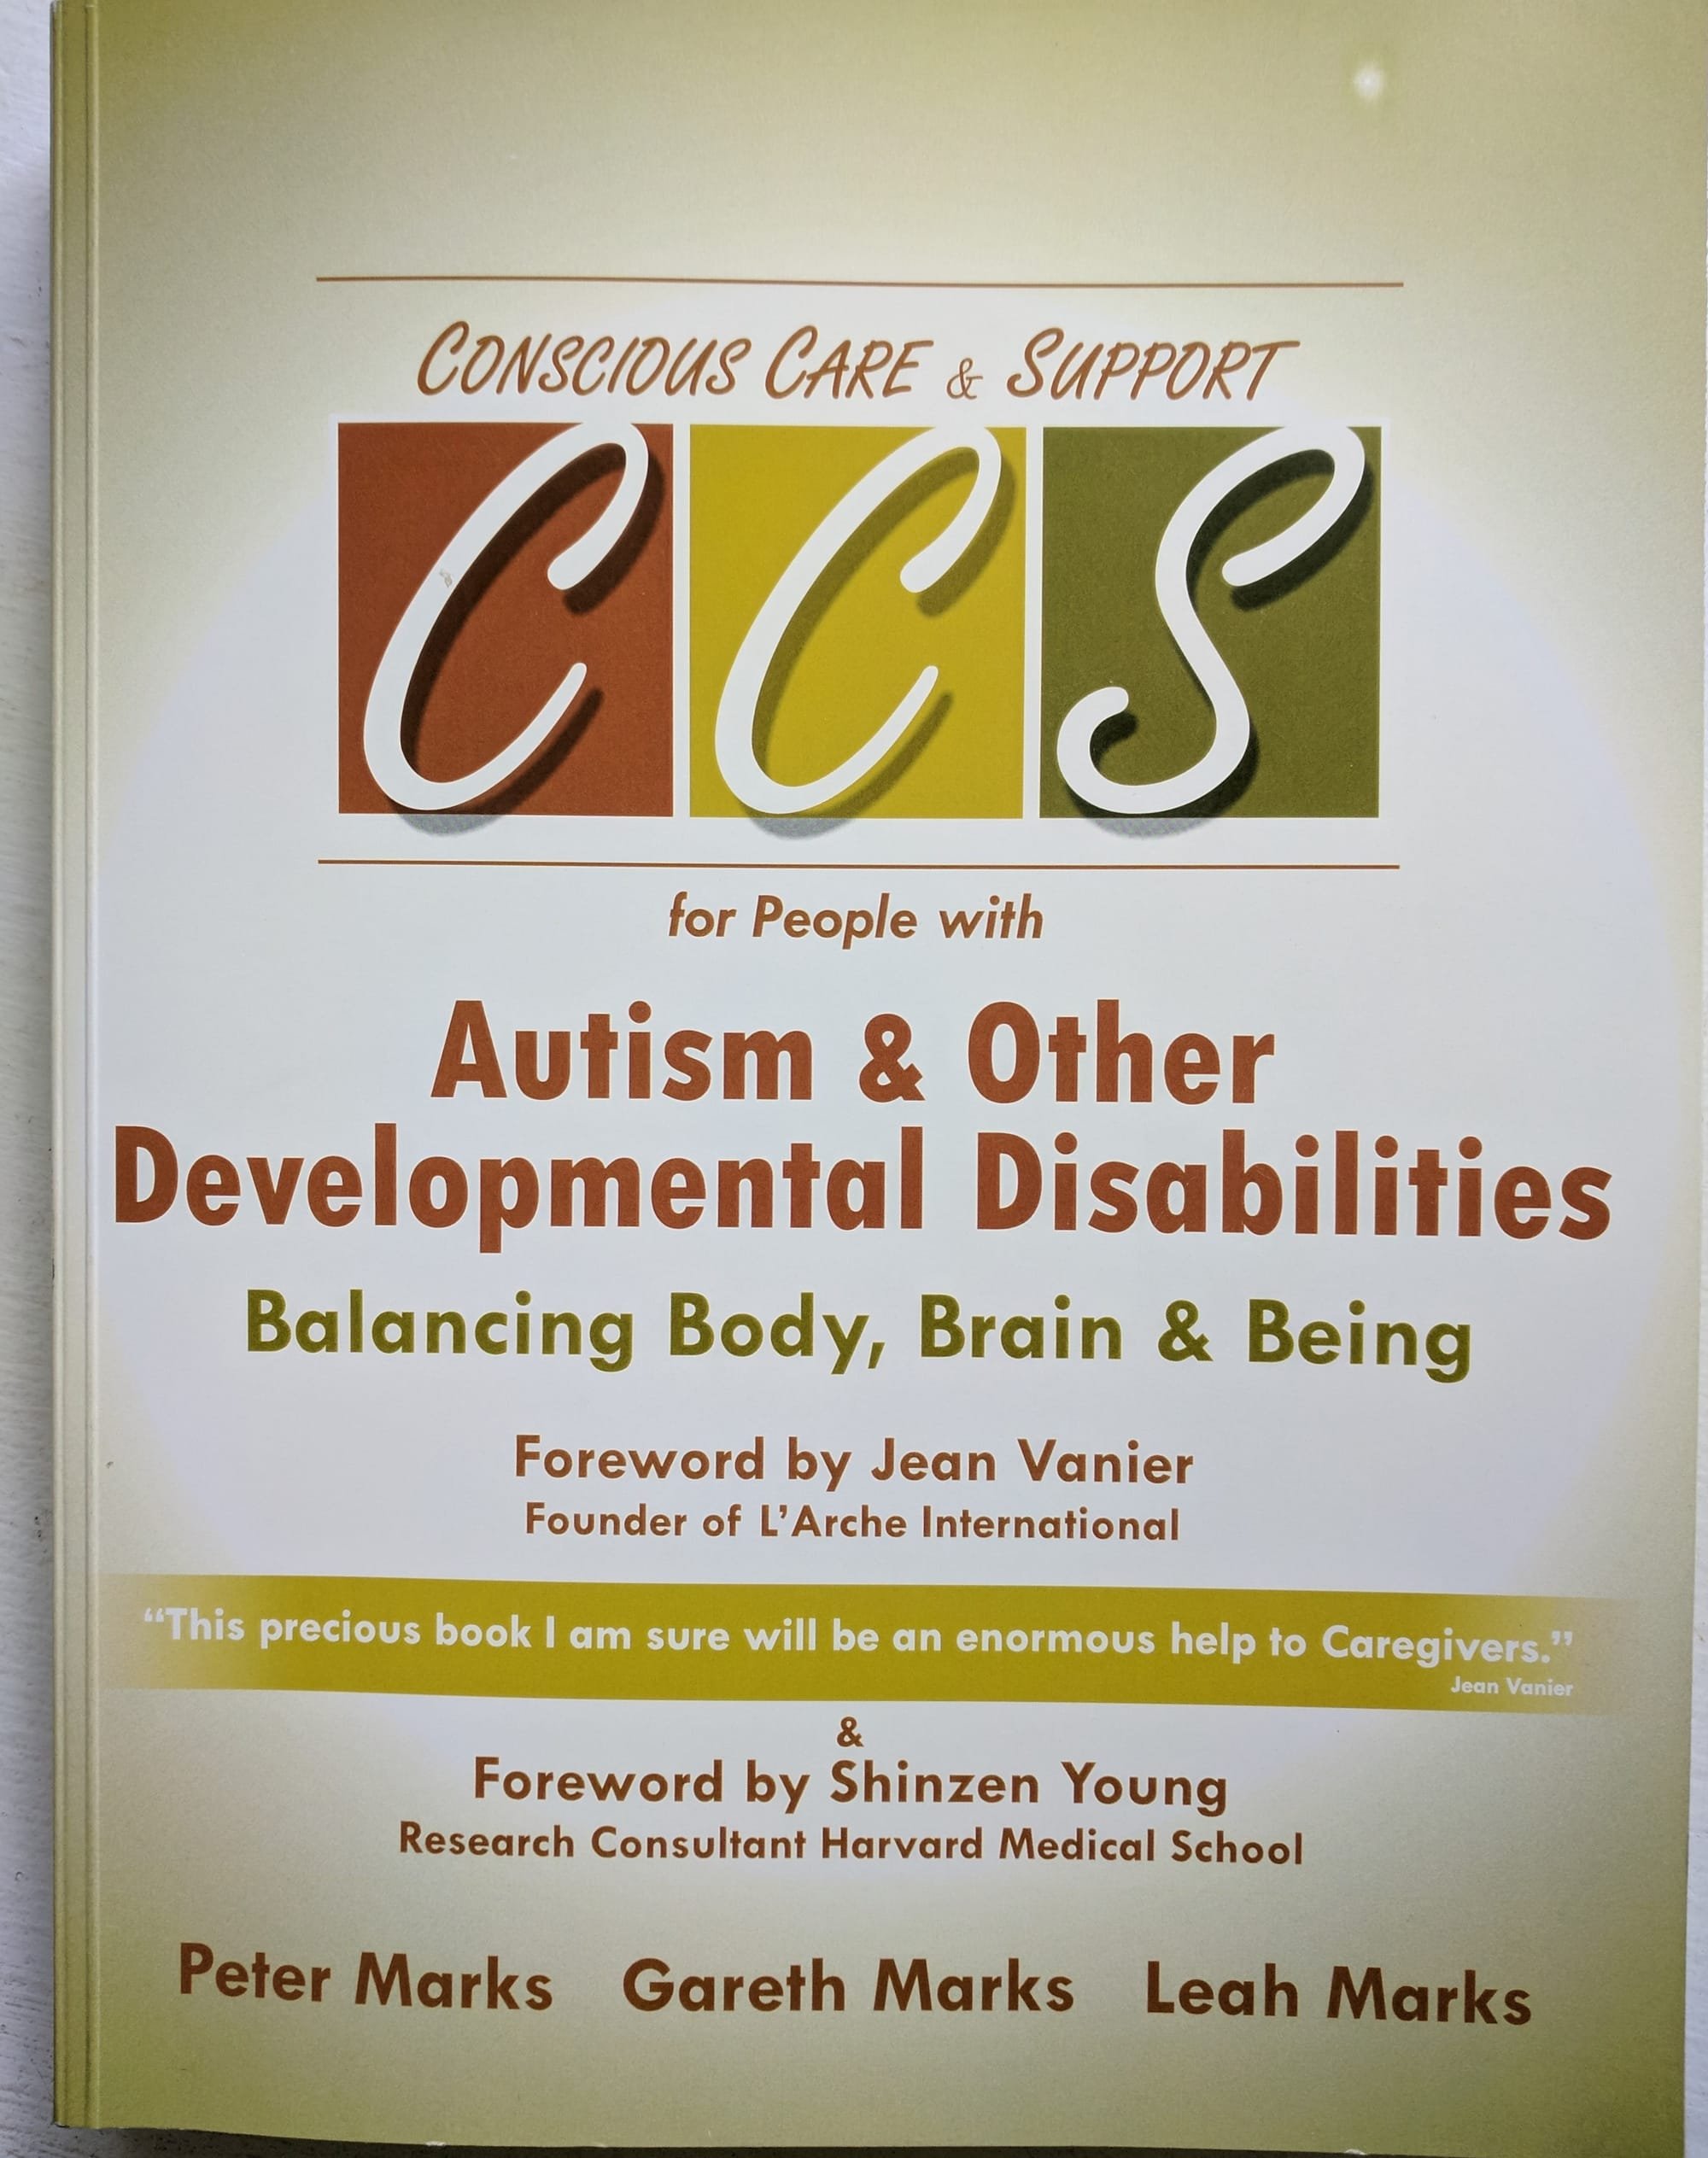 Book on Autism & Other Developmental Disabilities